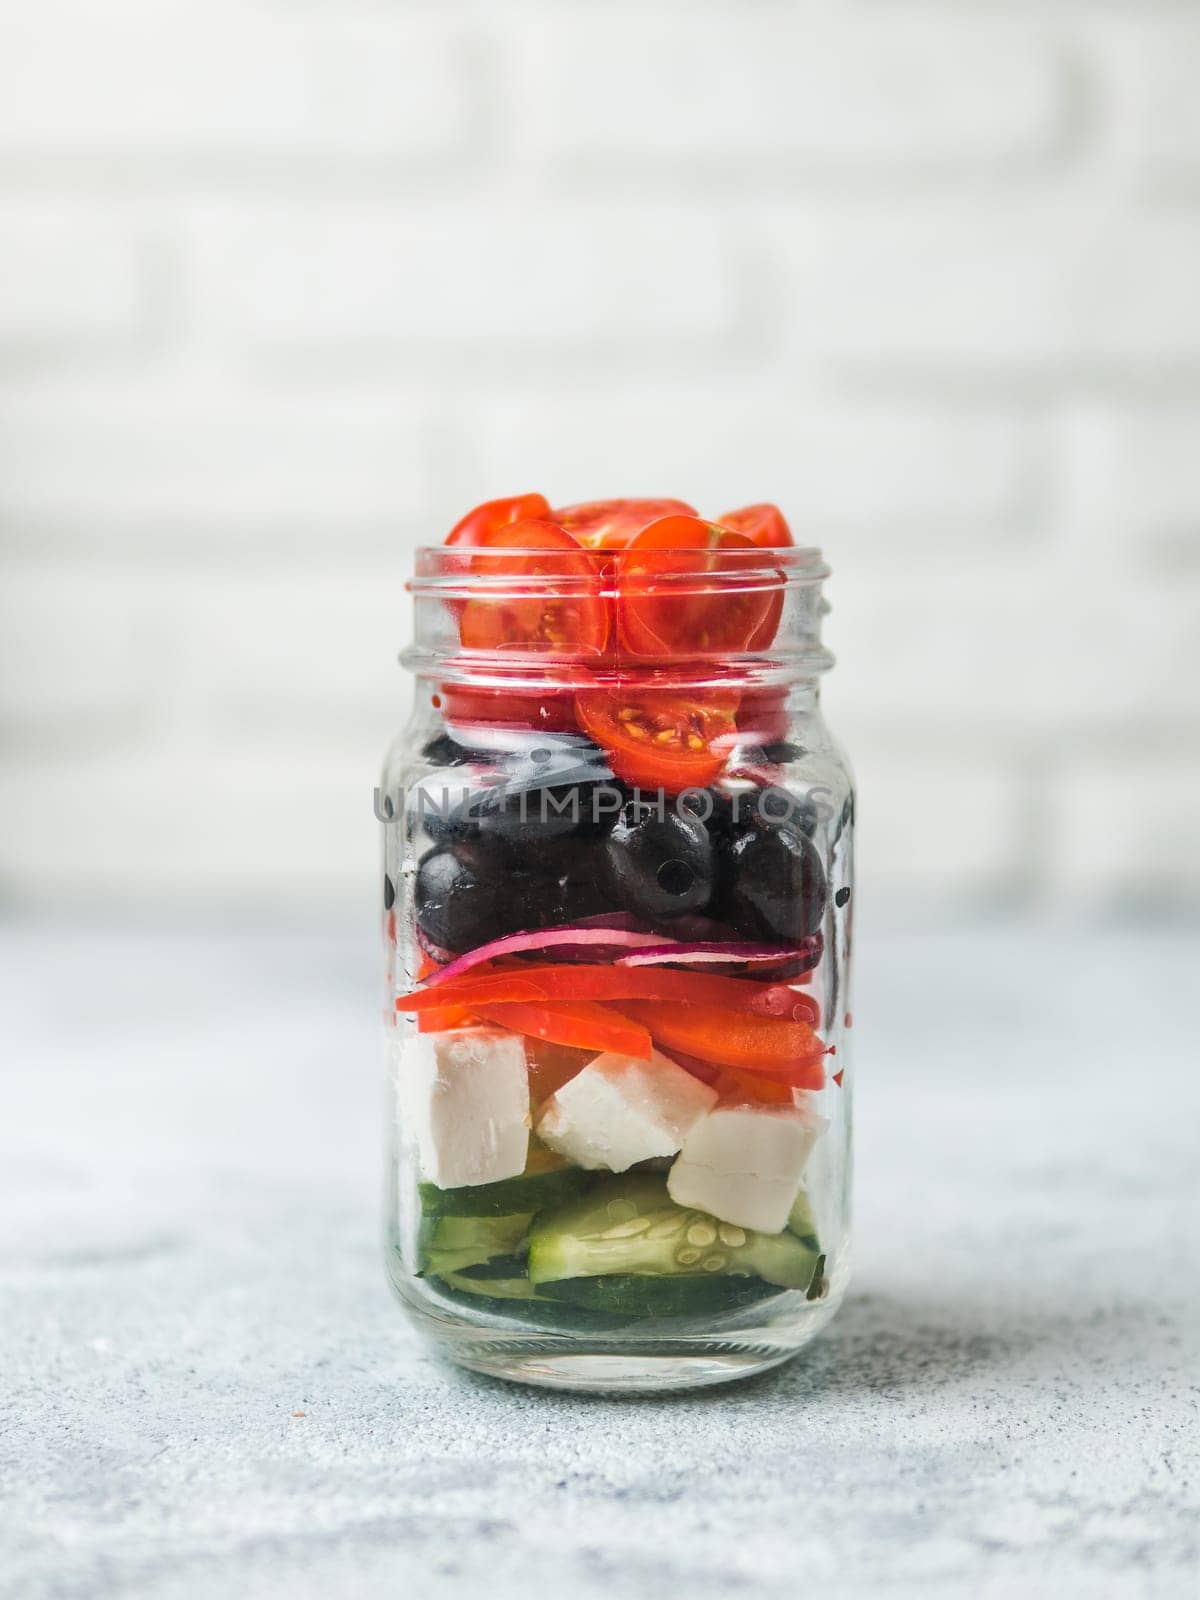 Greek Salad layered in glass mason jar on gray background, copy space. Trendy food. Idea, recept and concept of modern healthy food.